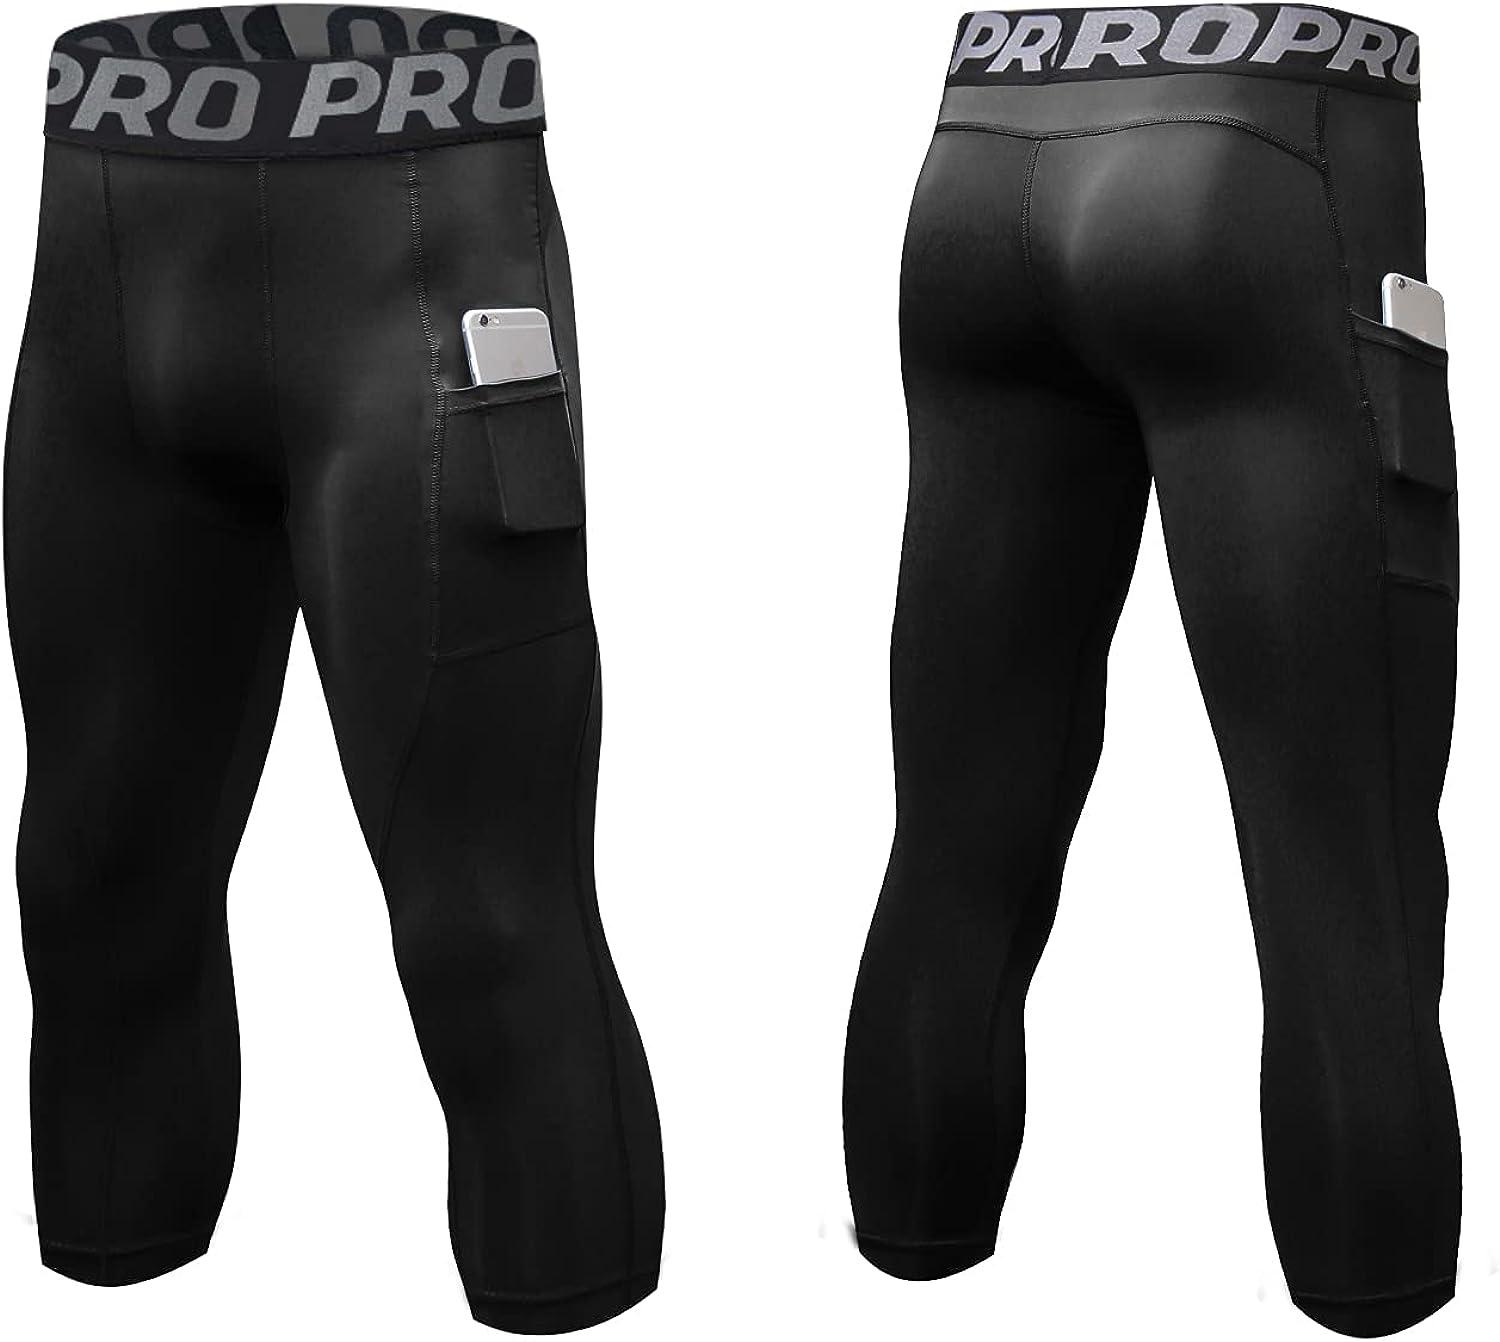 Pro Combat Basketball Pants For Men Quickly Dry, Quick Drying